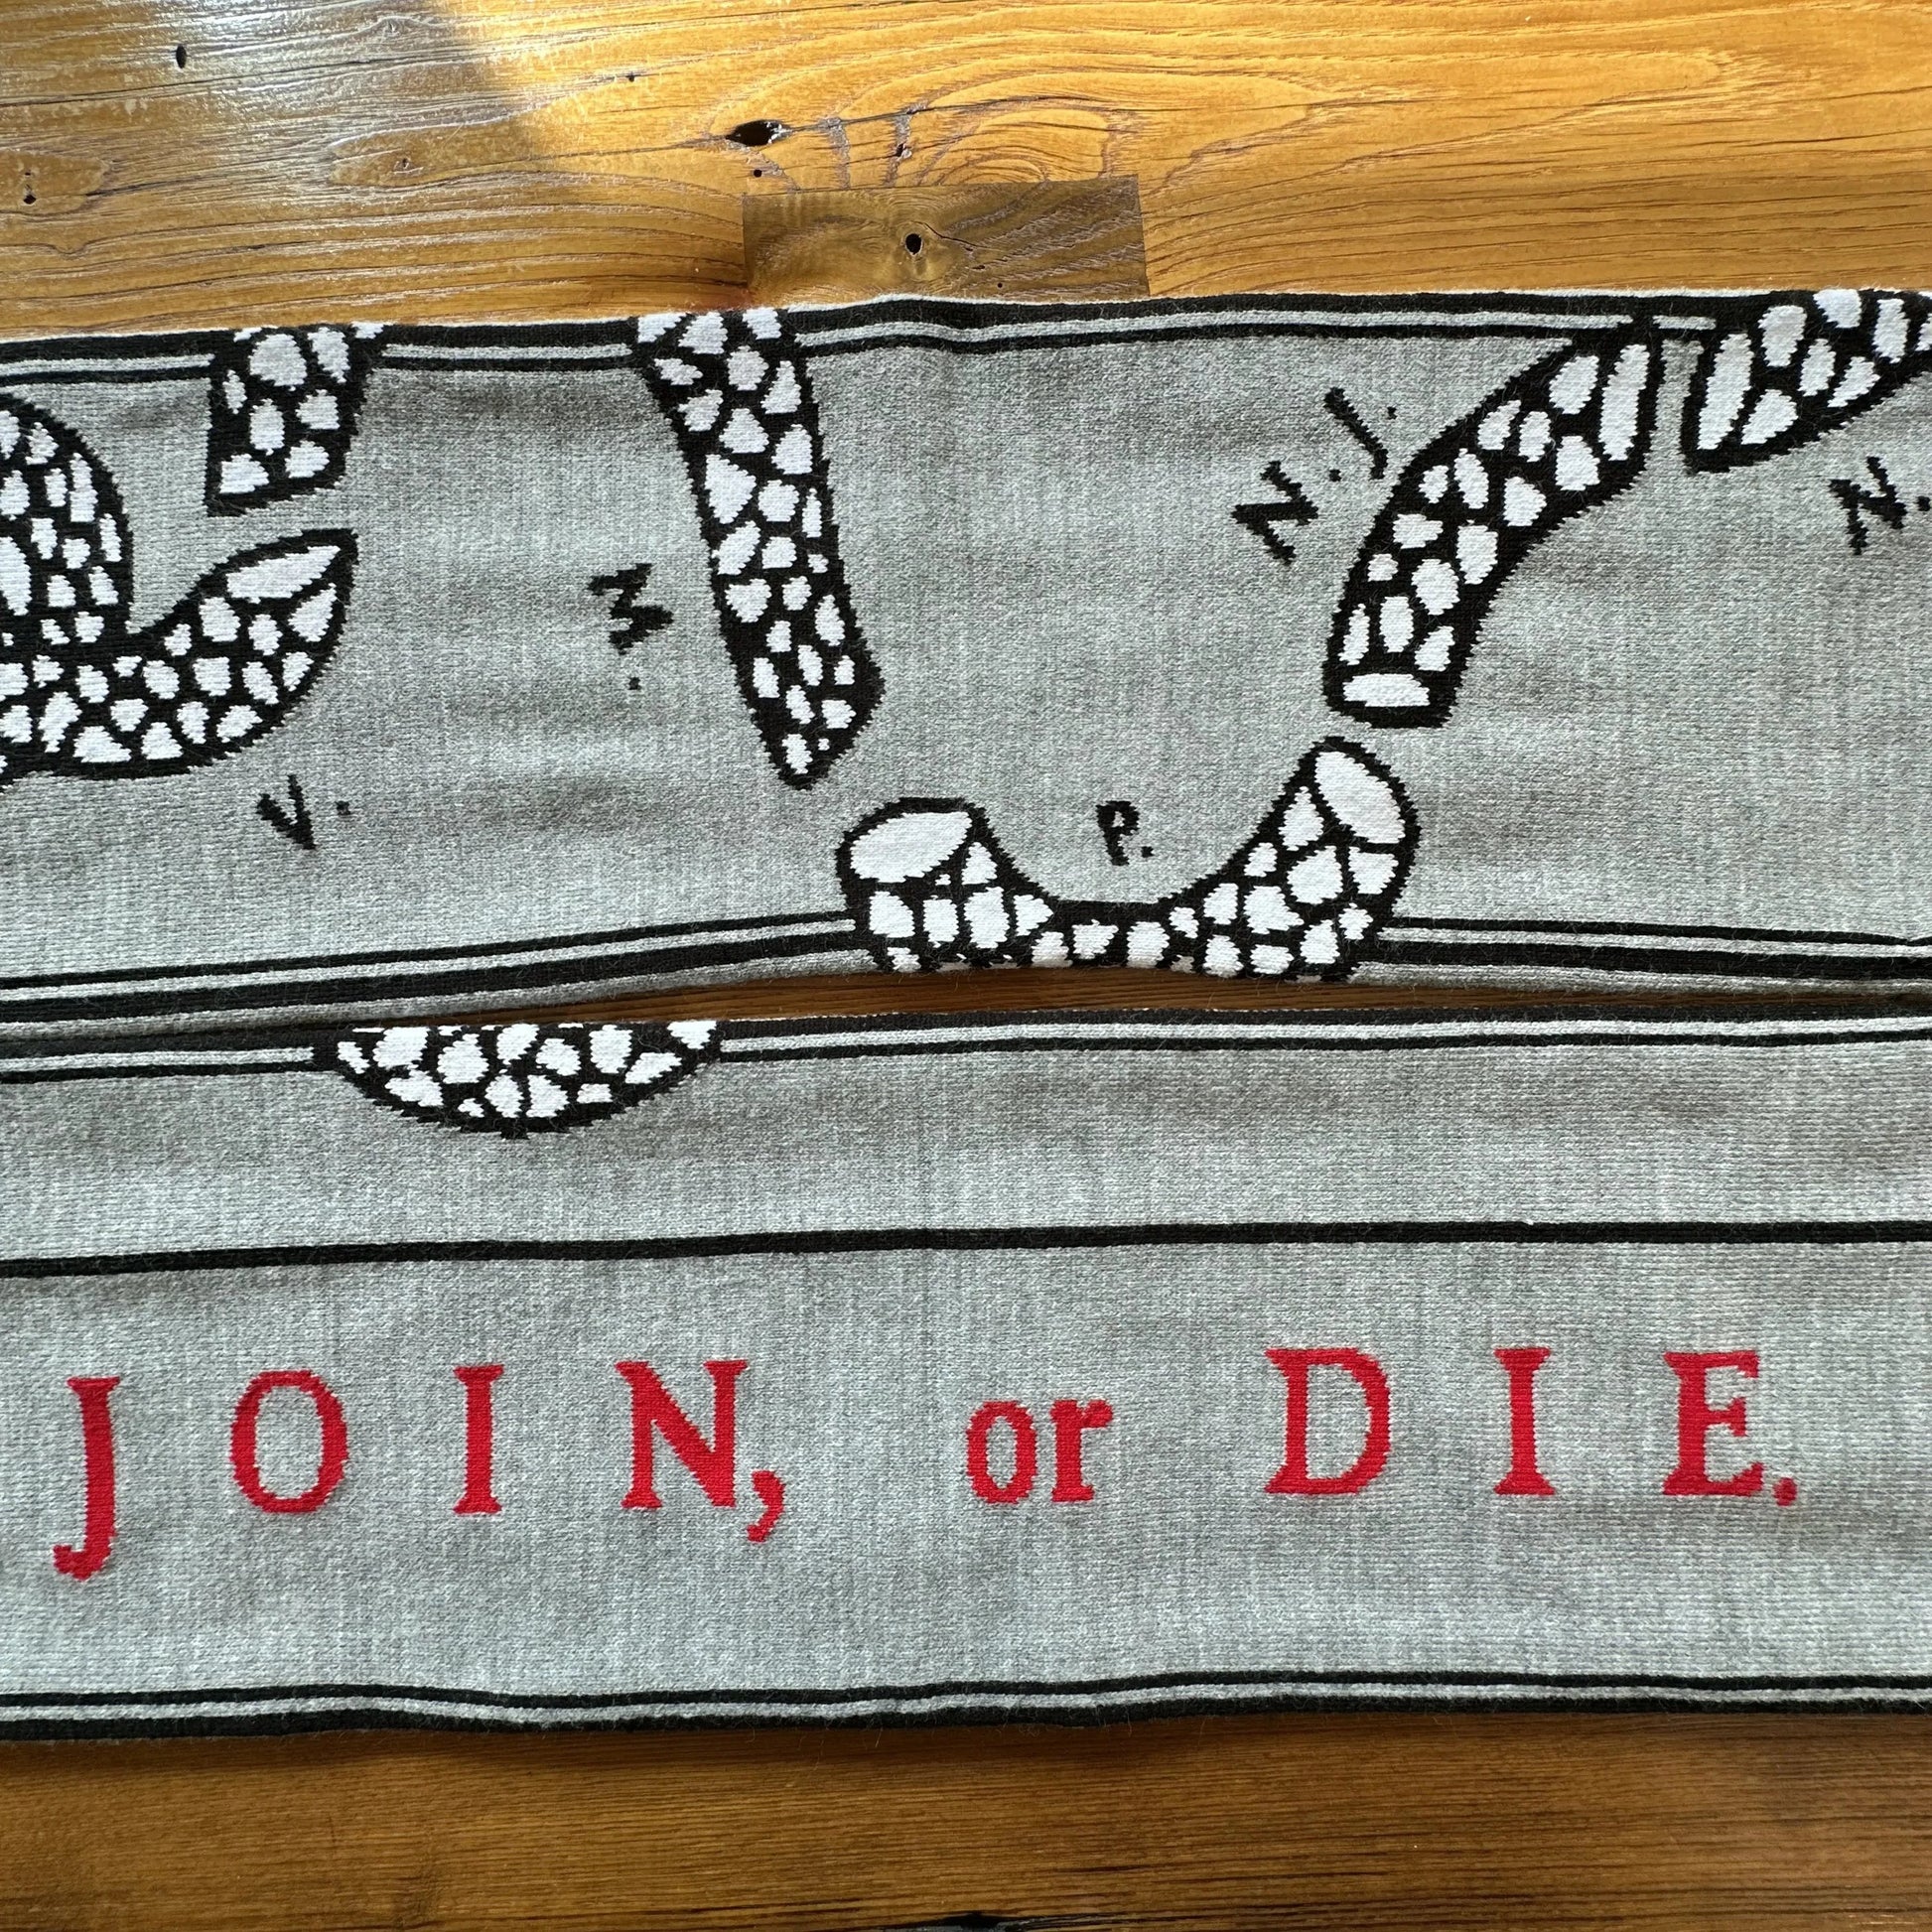 Join or Die text from the "Join or Die" woven scarf — Made in America from The History List store